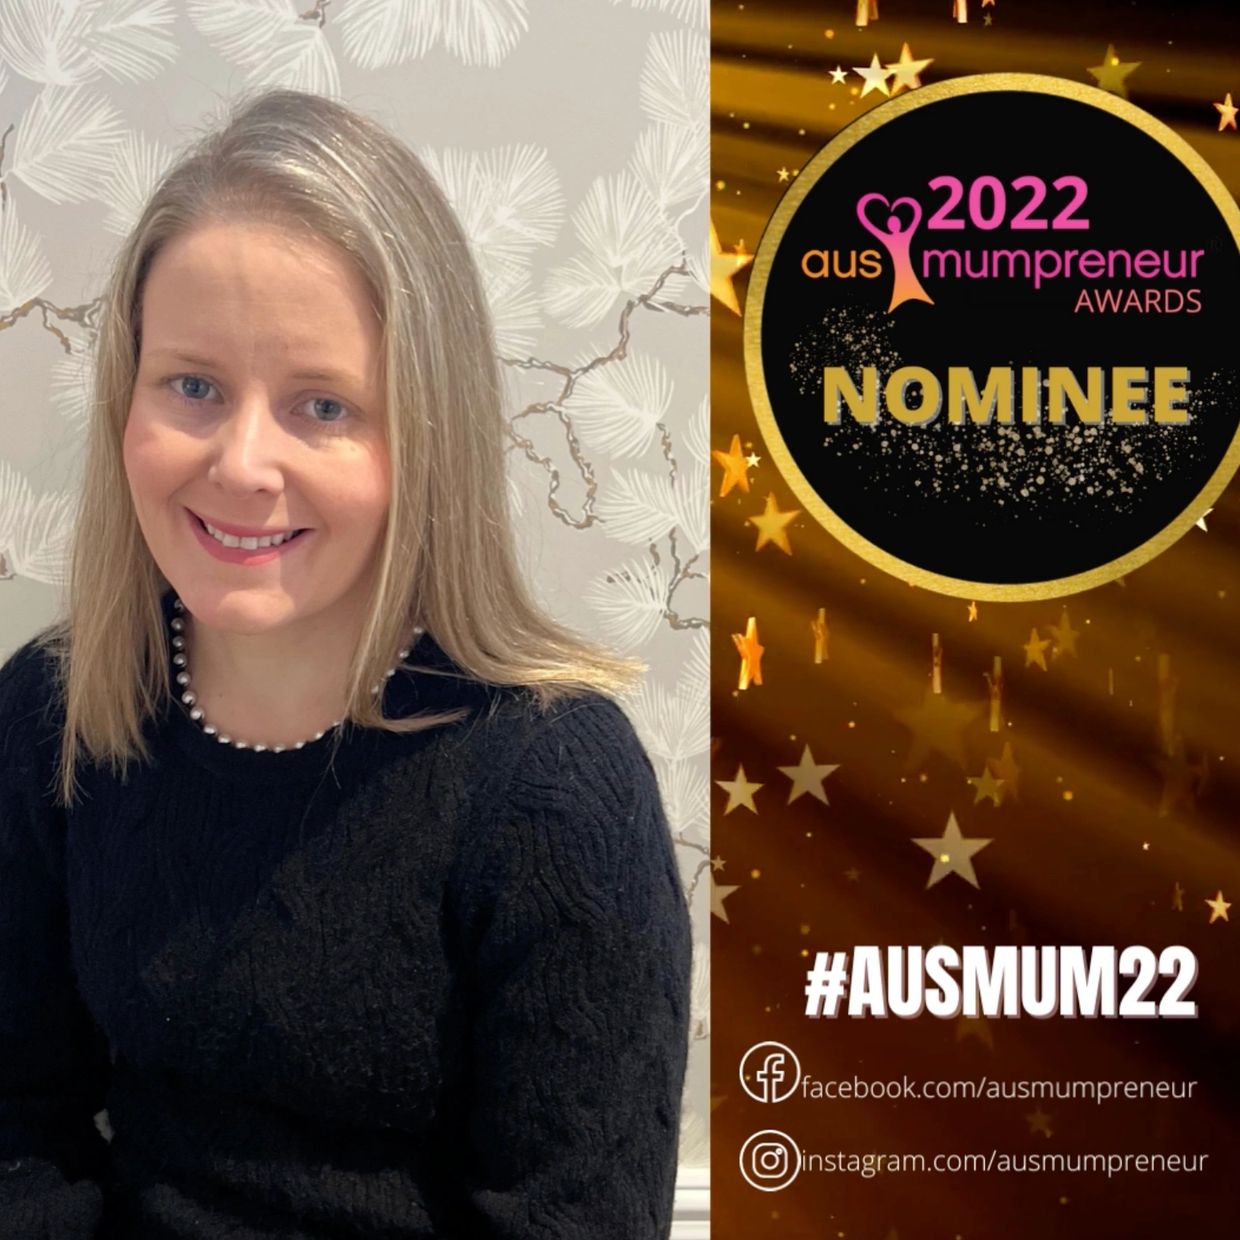 Thank you to Pinky McKay for the AusMumpreneur Nomination!